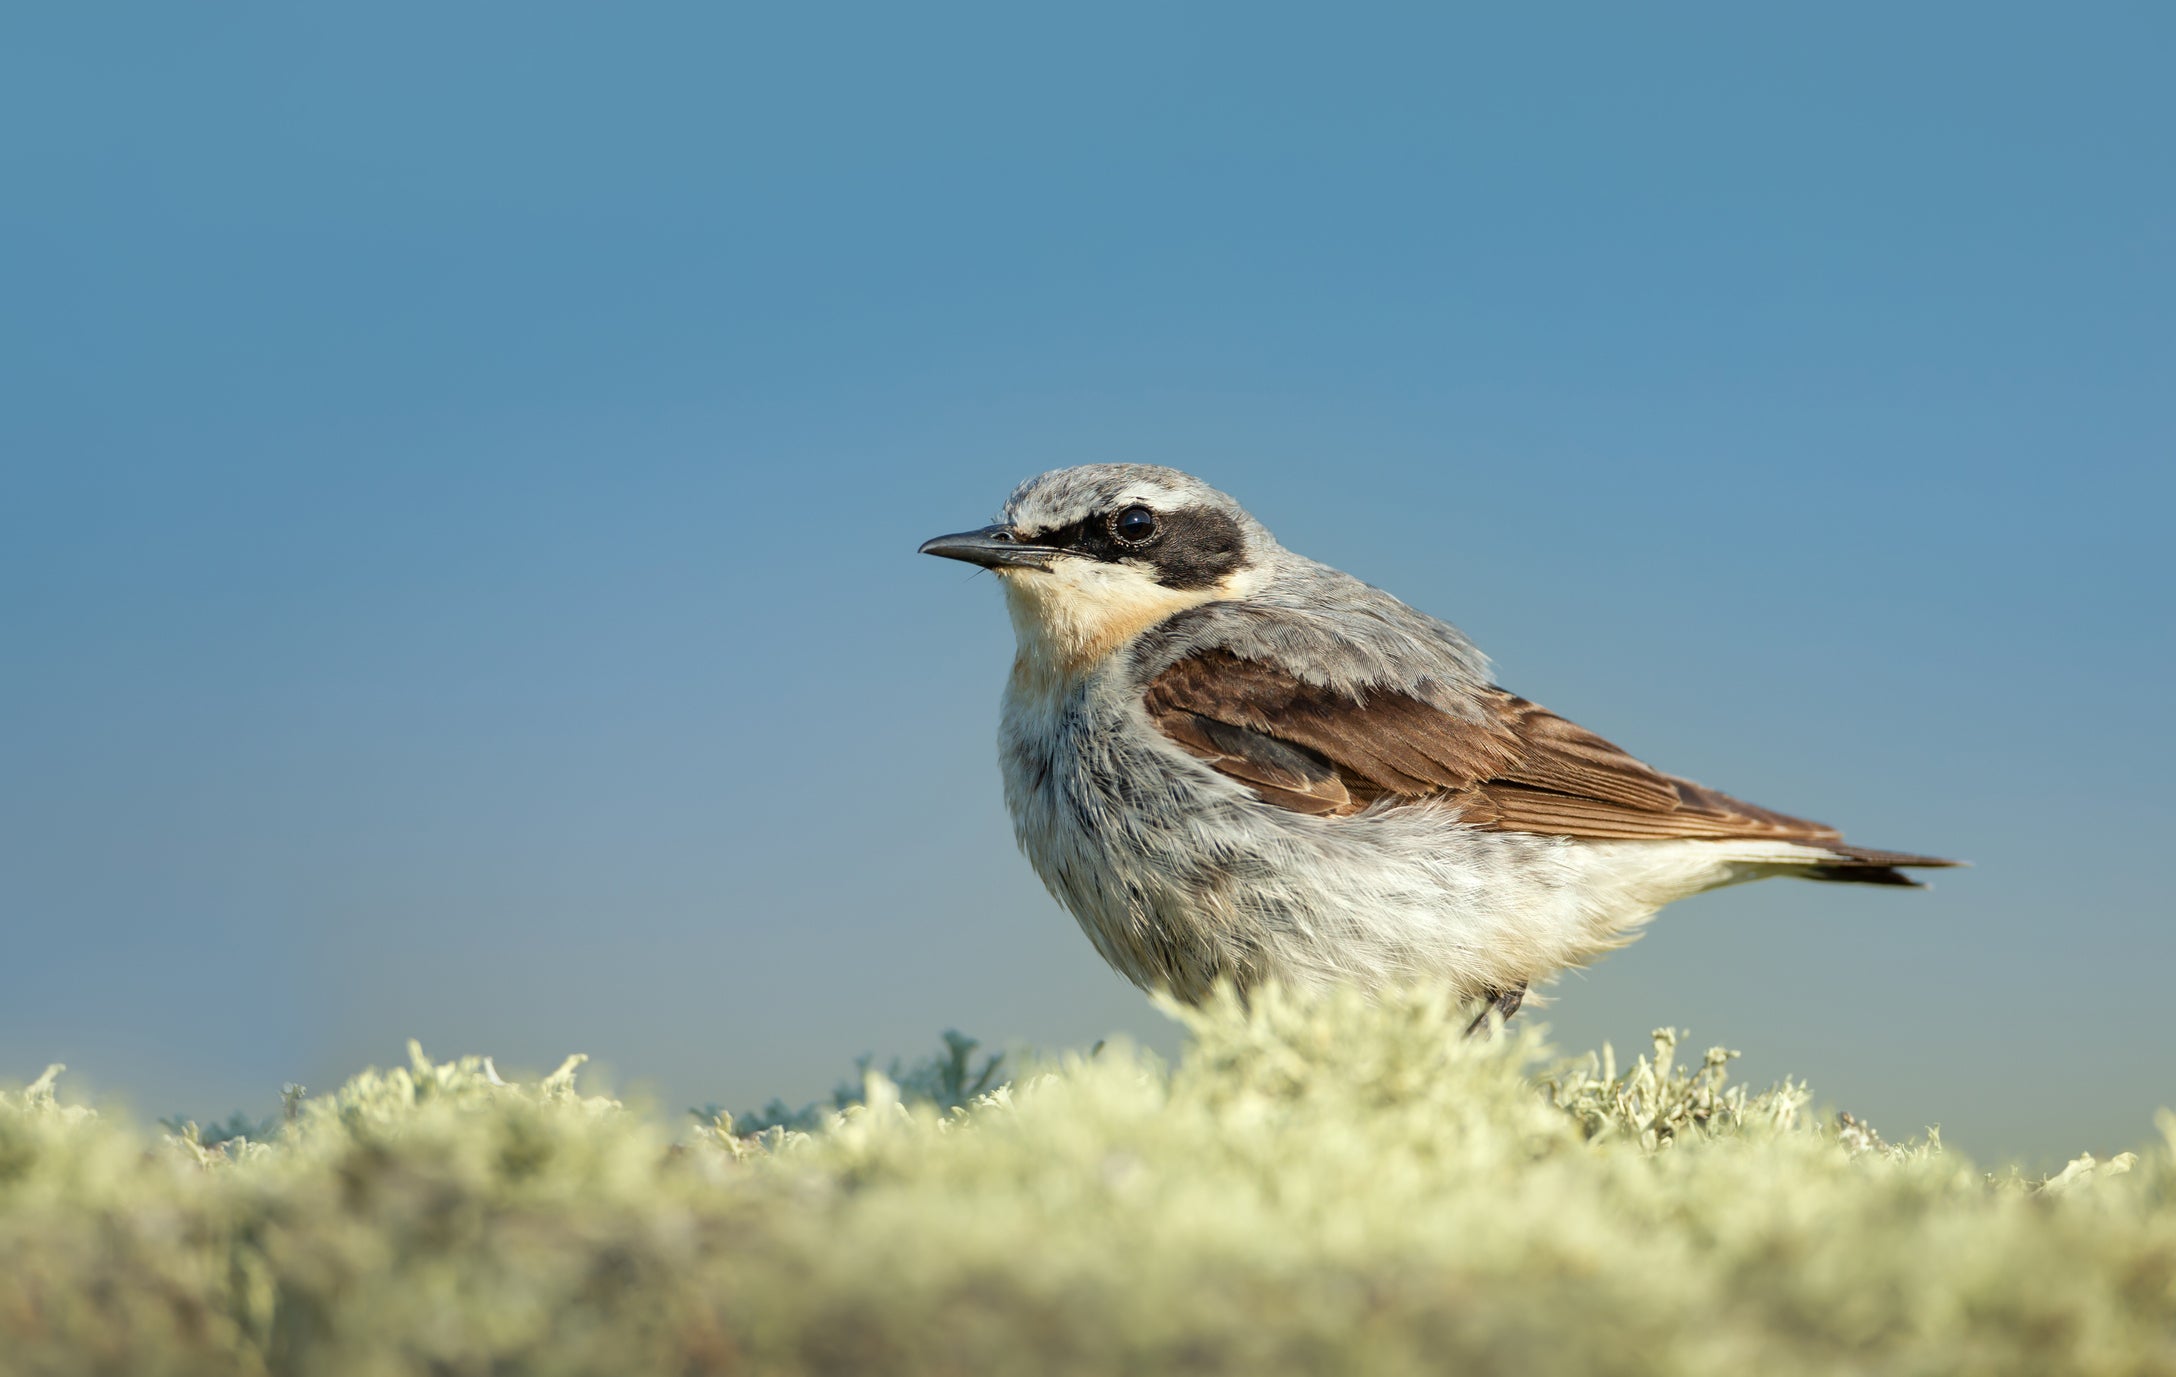 The wheatear spends its winters in central Africa before returning to the UK